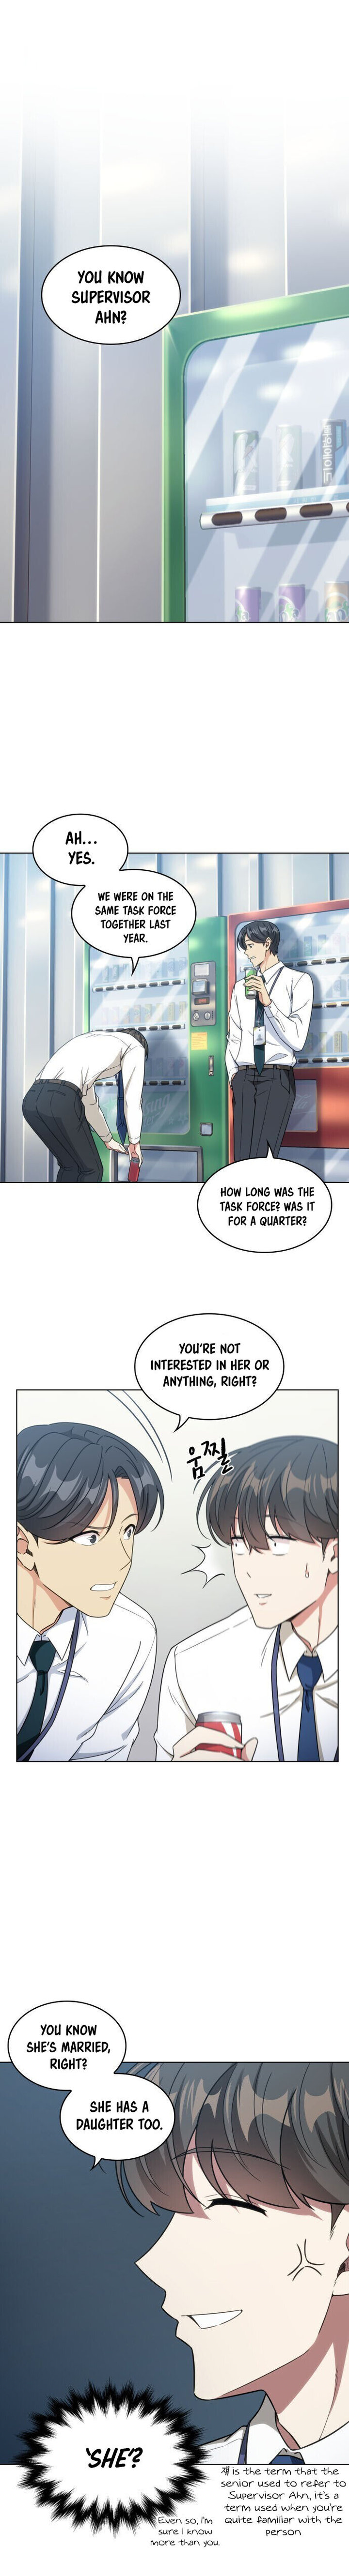 My Office Noona’s Story - Chapter 31 Page 2